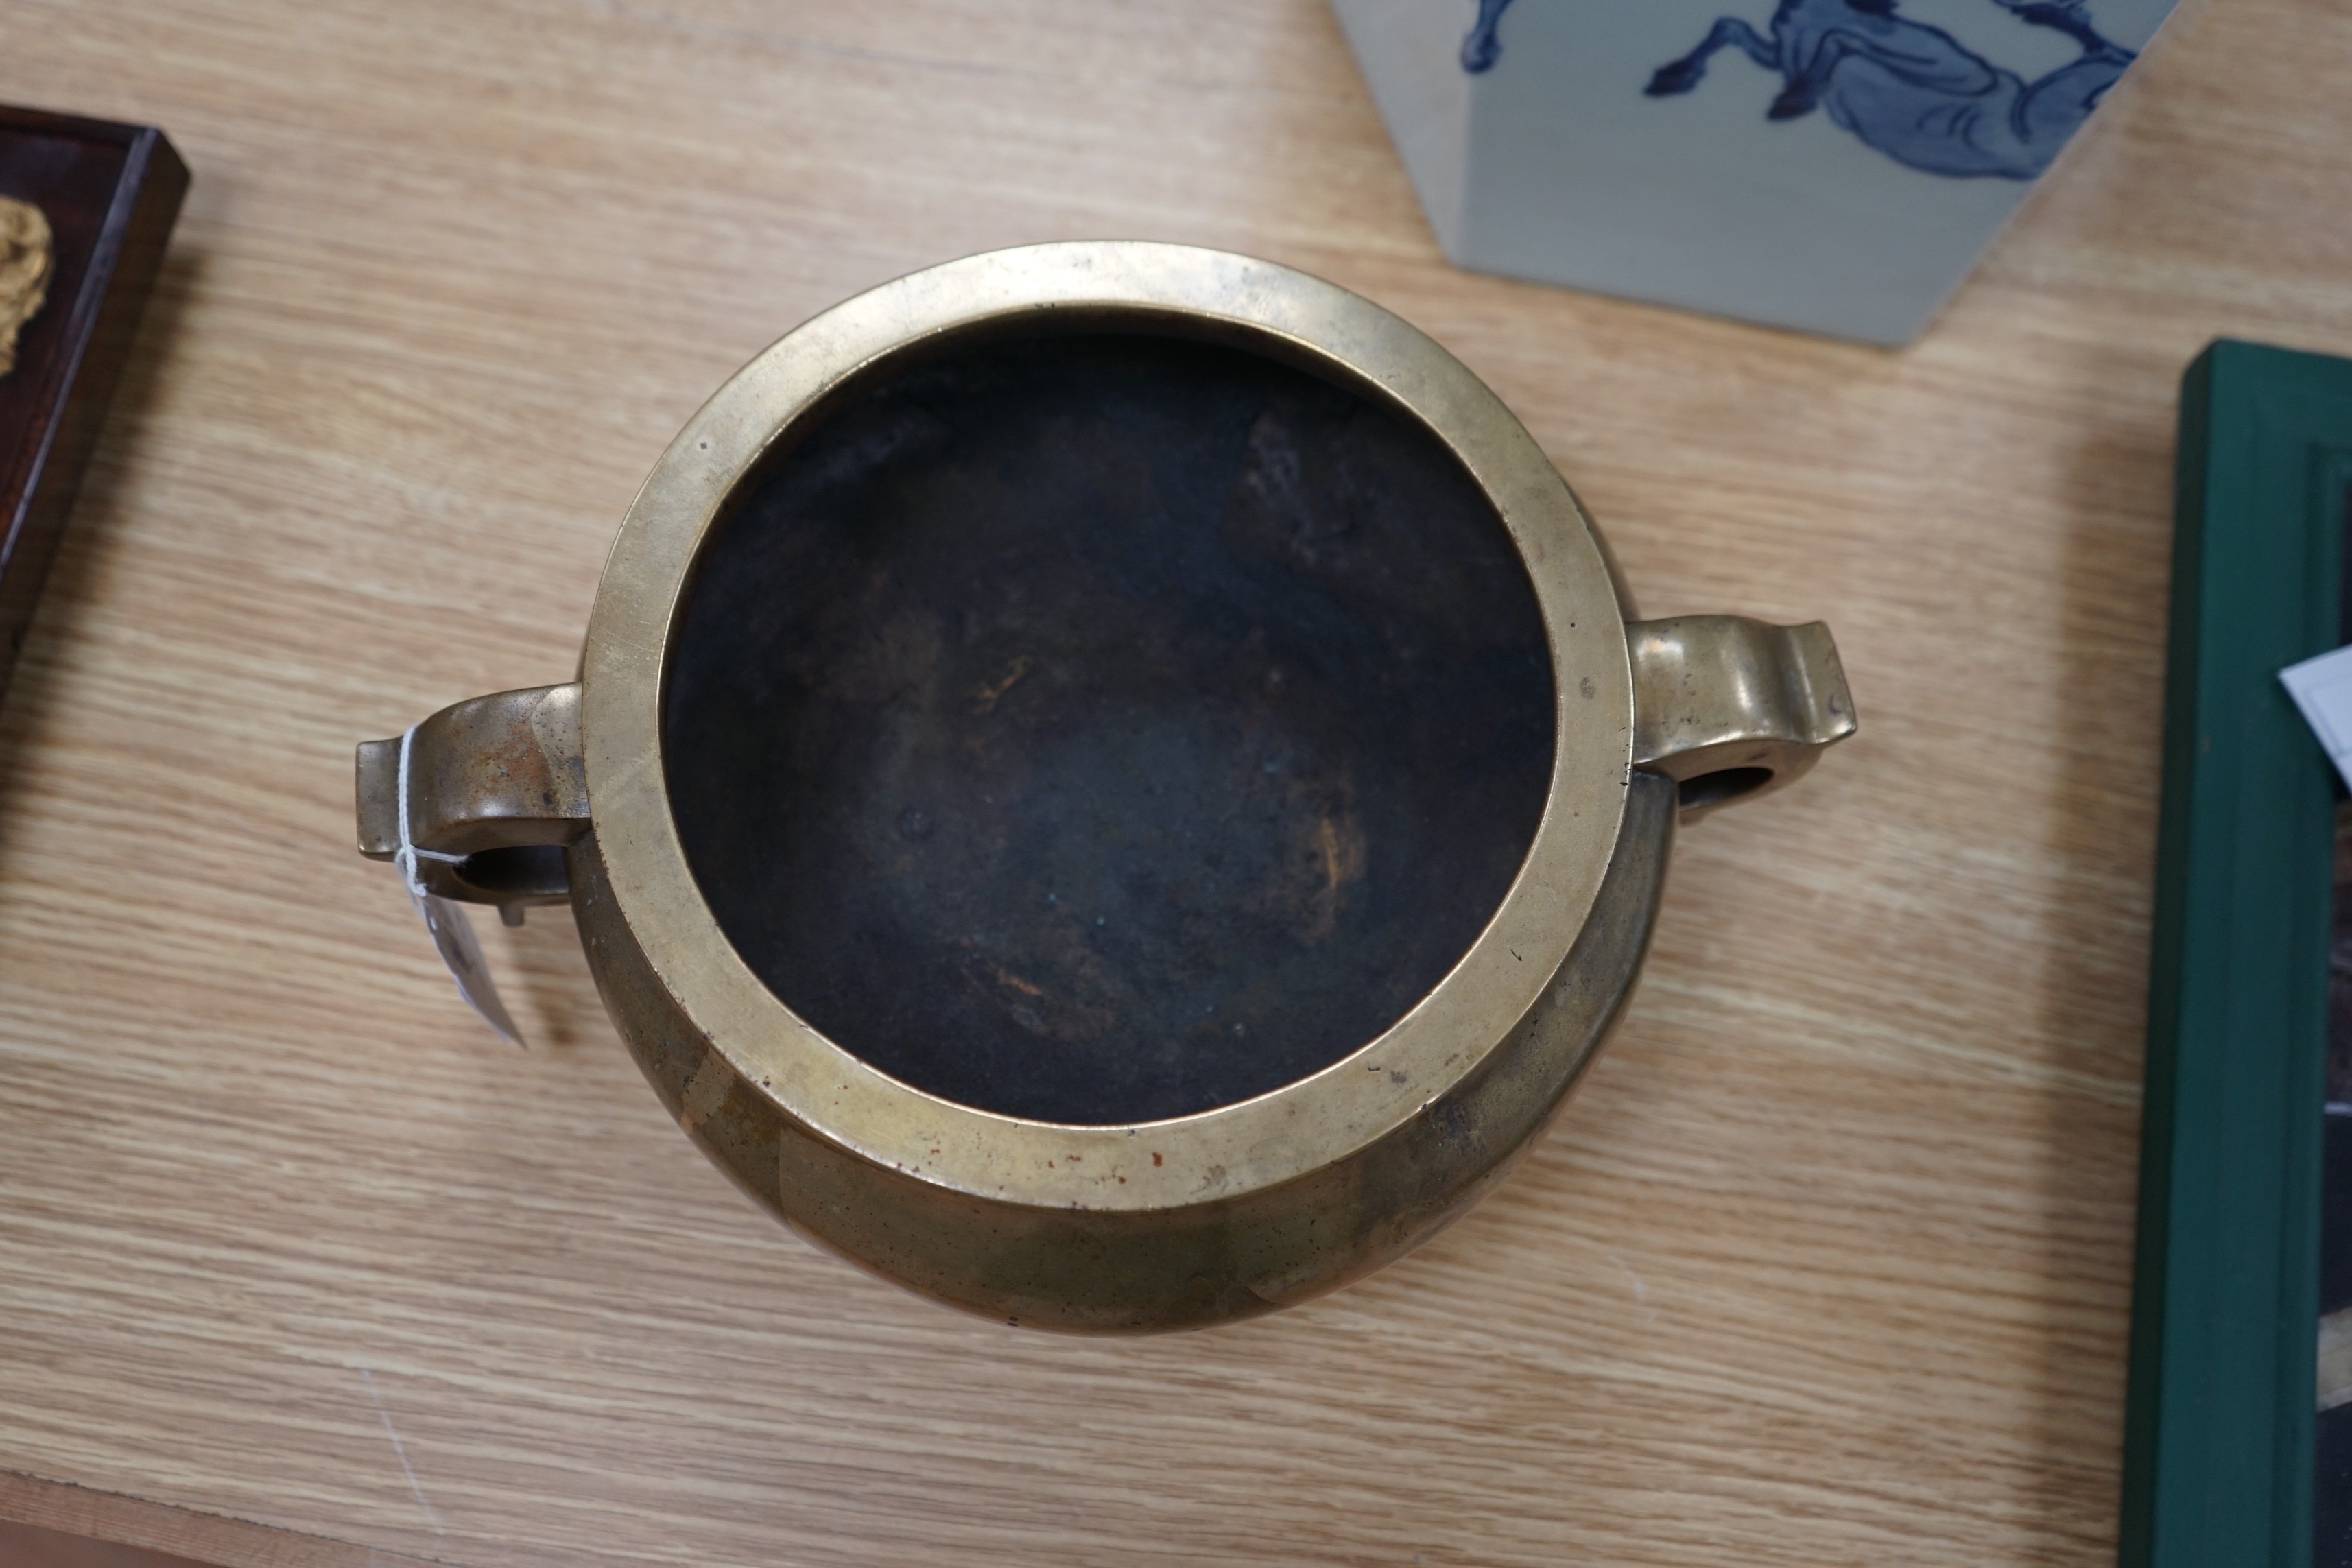 A large Chinese bronze censer, ding, 18th century, with sixteen character Xuande mark, 29cm wide